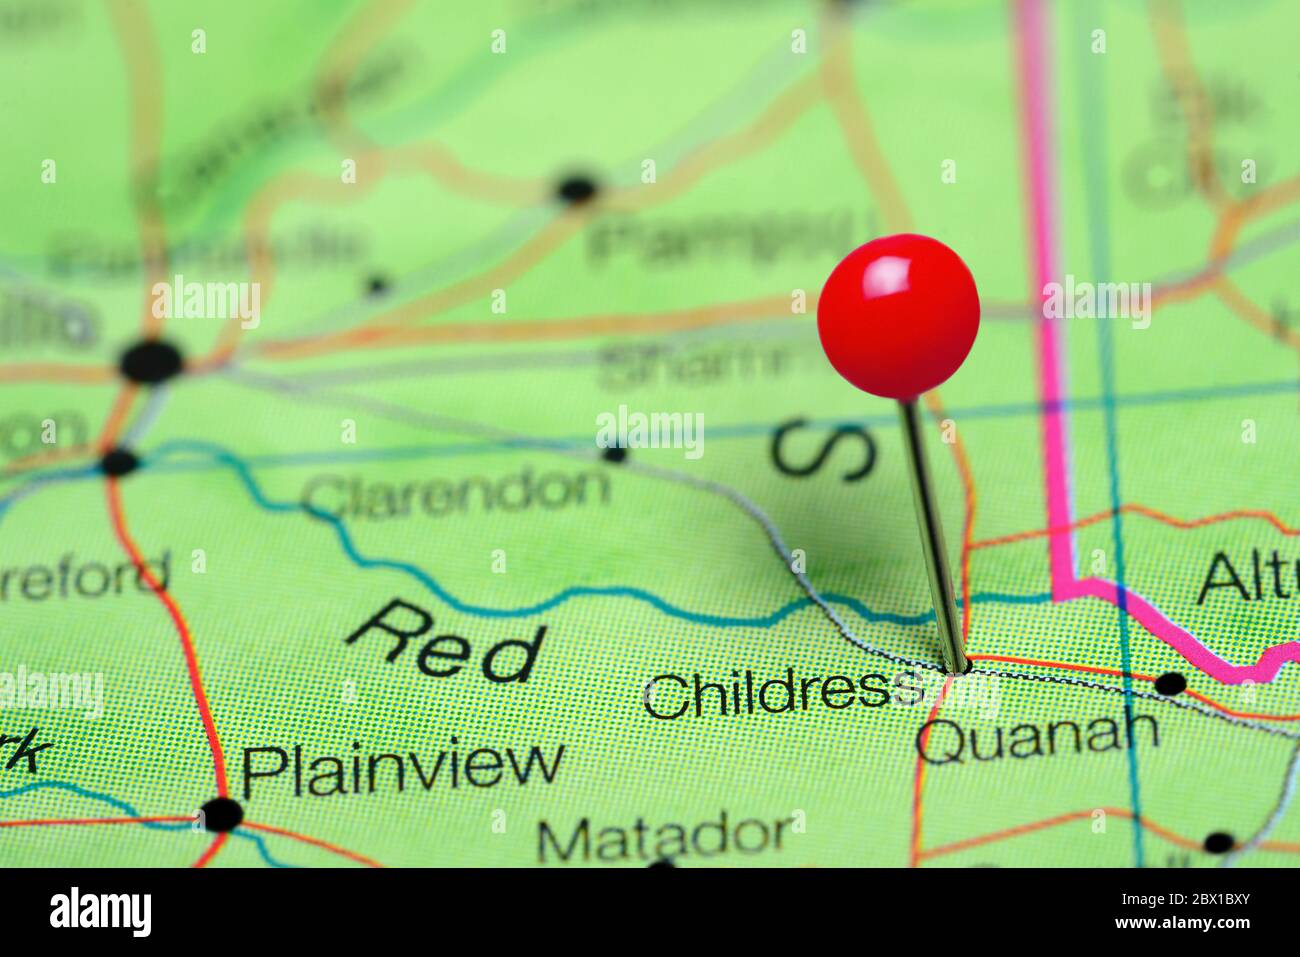 Childress pinned on a map of Texas, USA Stock Photo